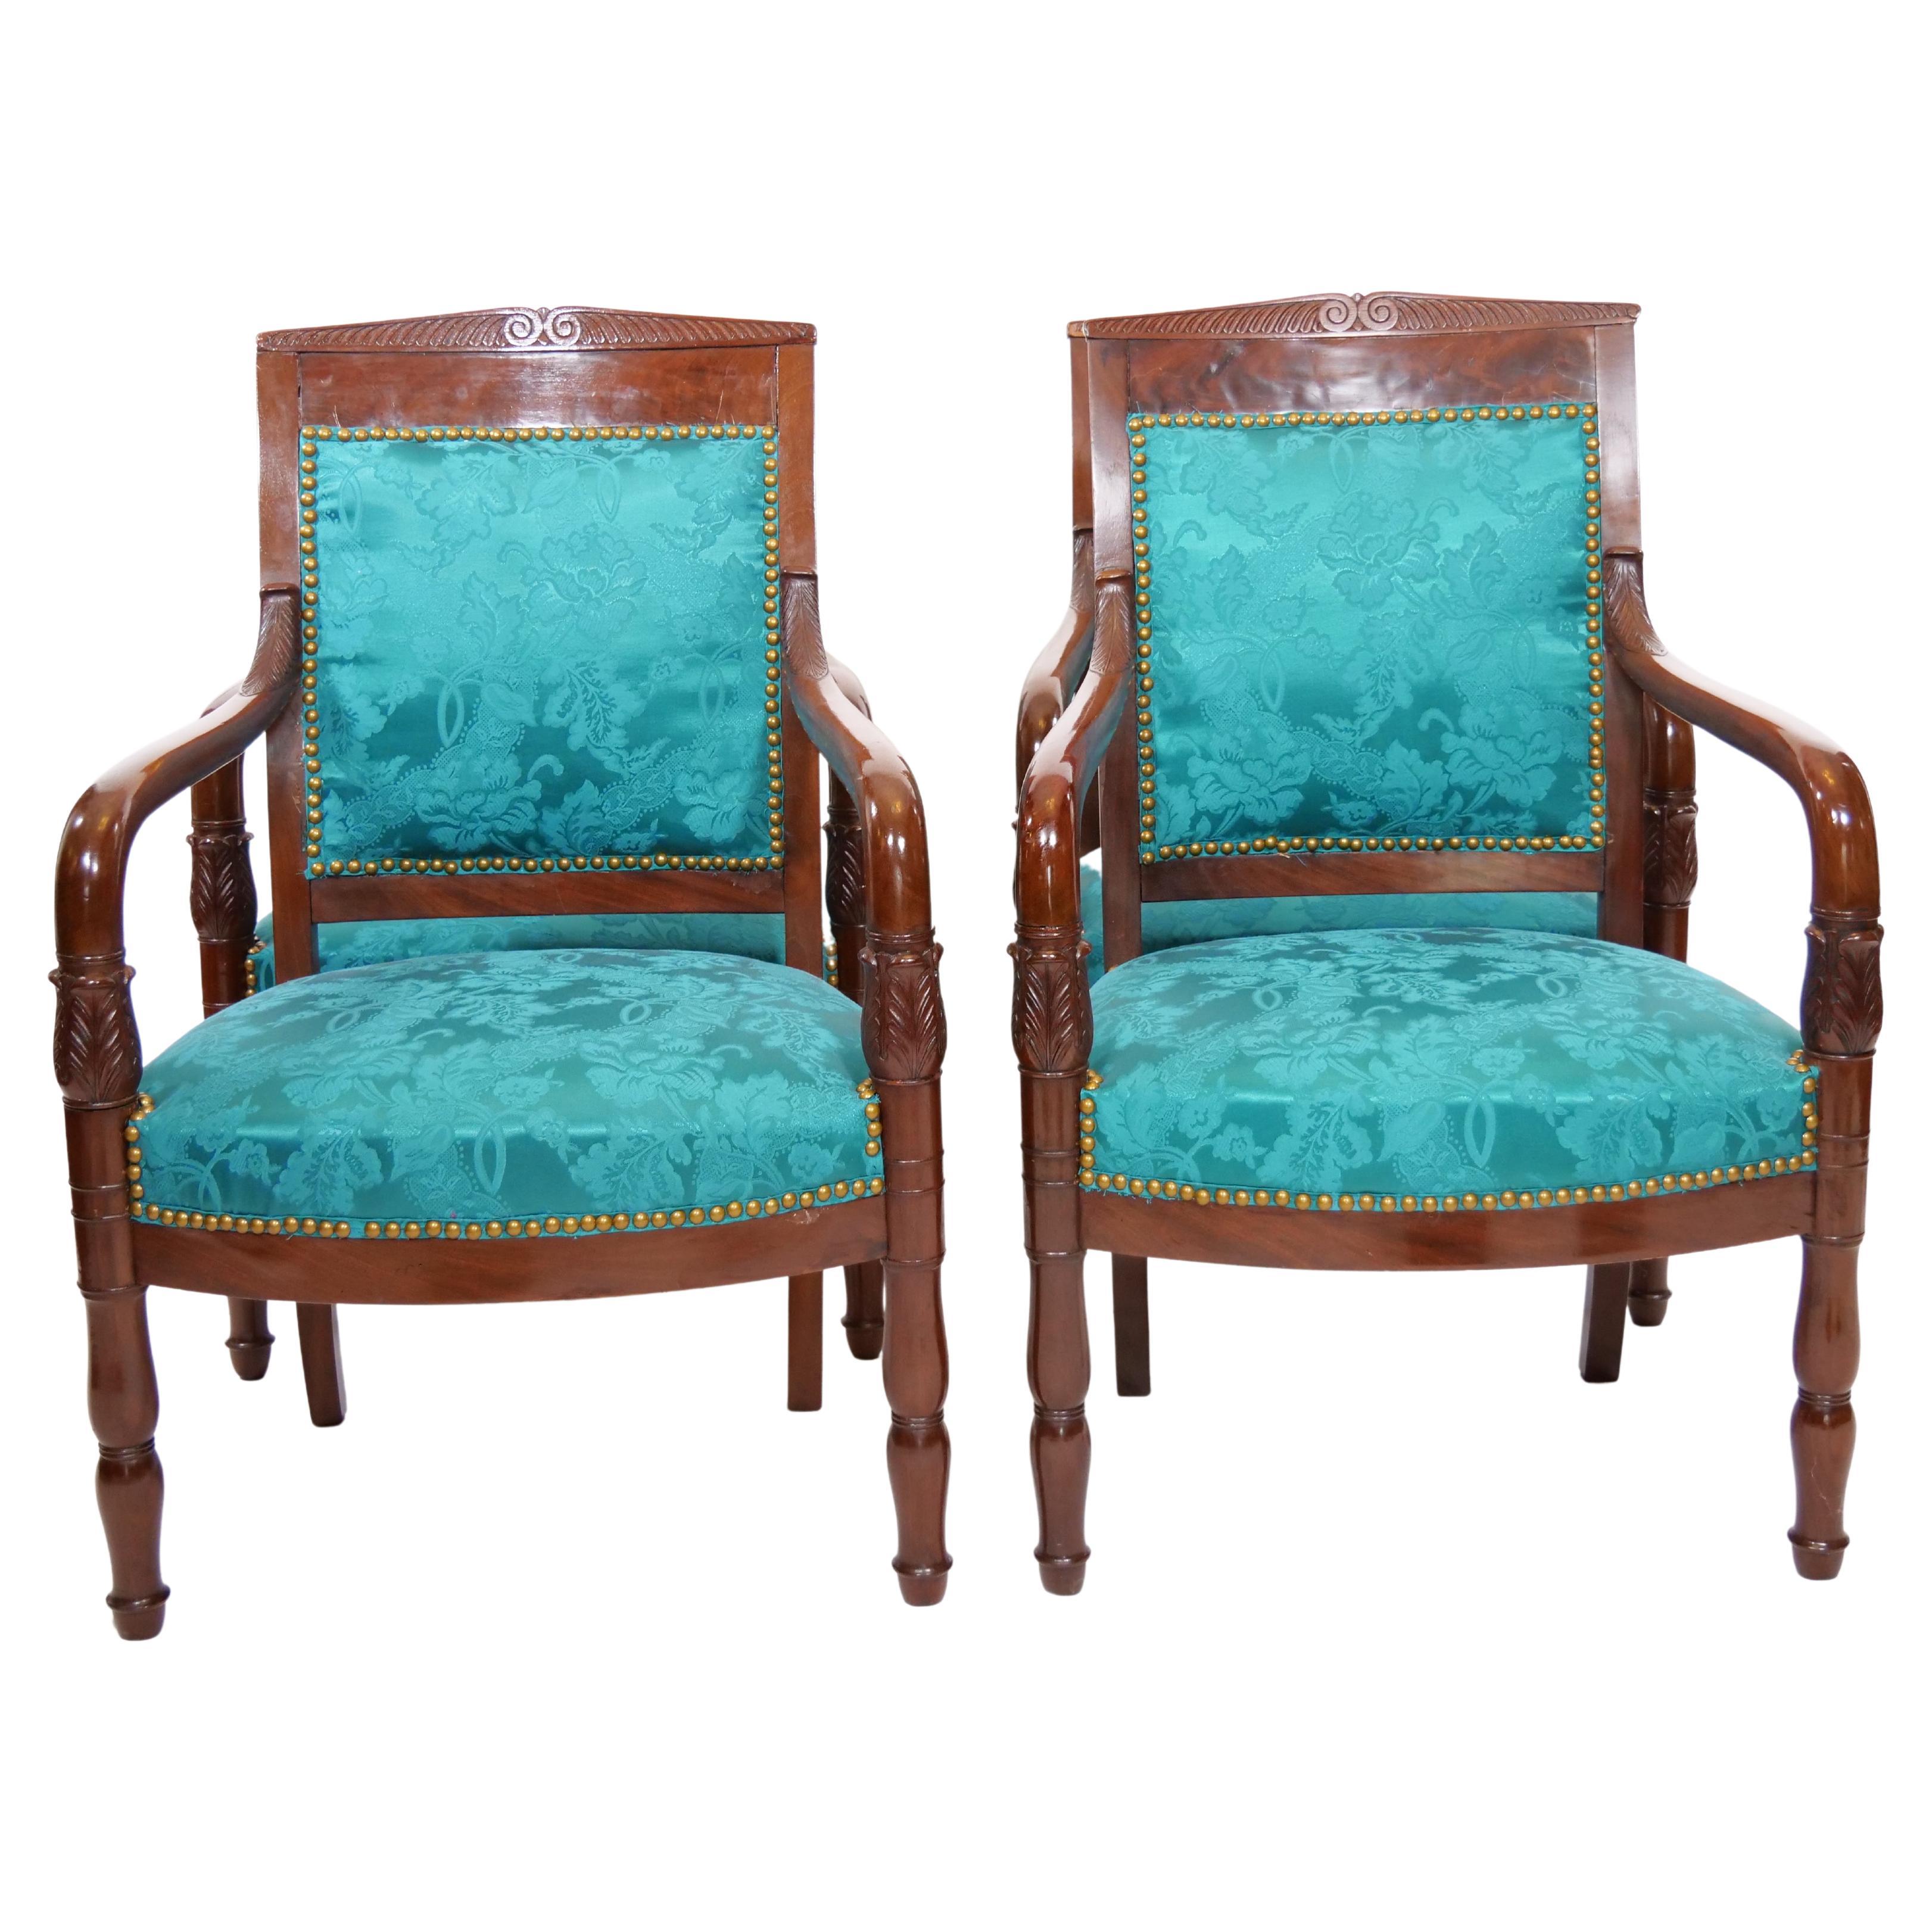 Hand-Carved 19th Century Mahogany Wood Framed / Upholstered Armchair Set For Sale